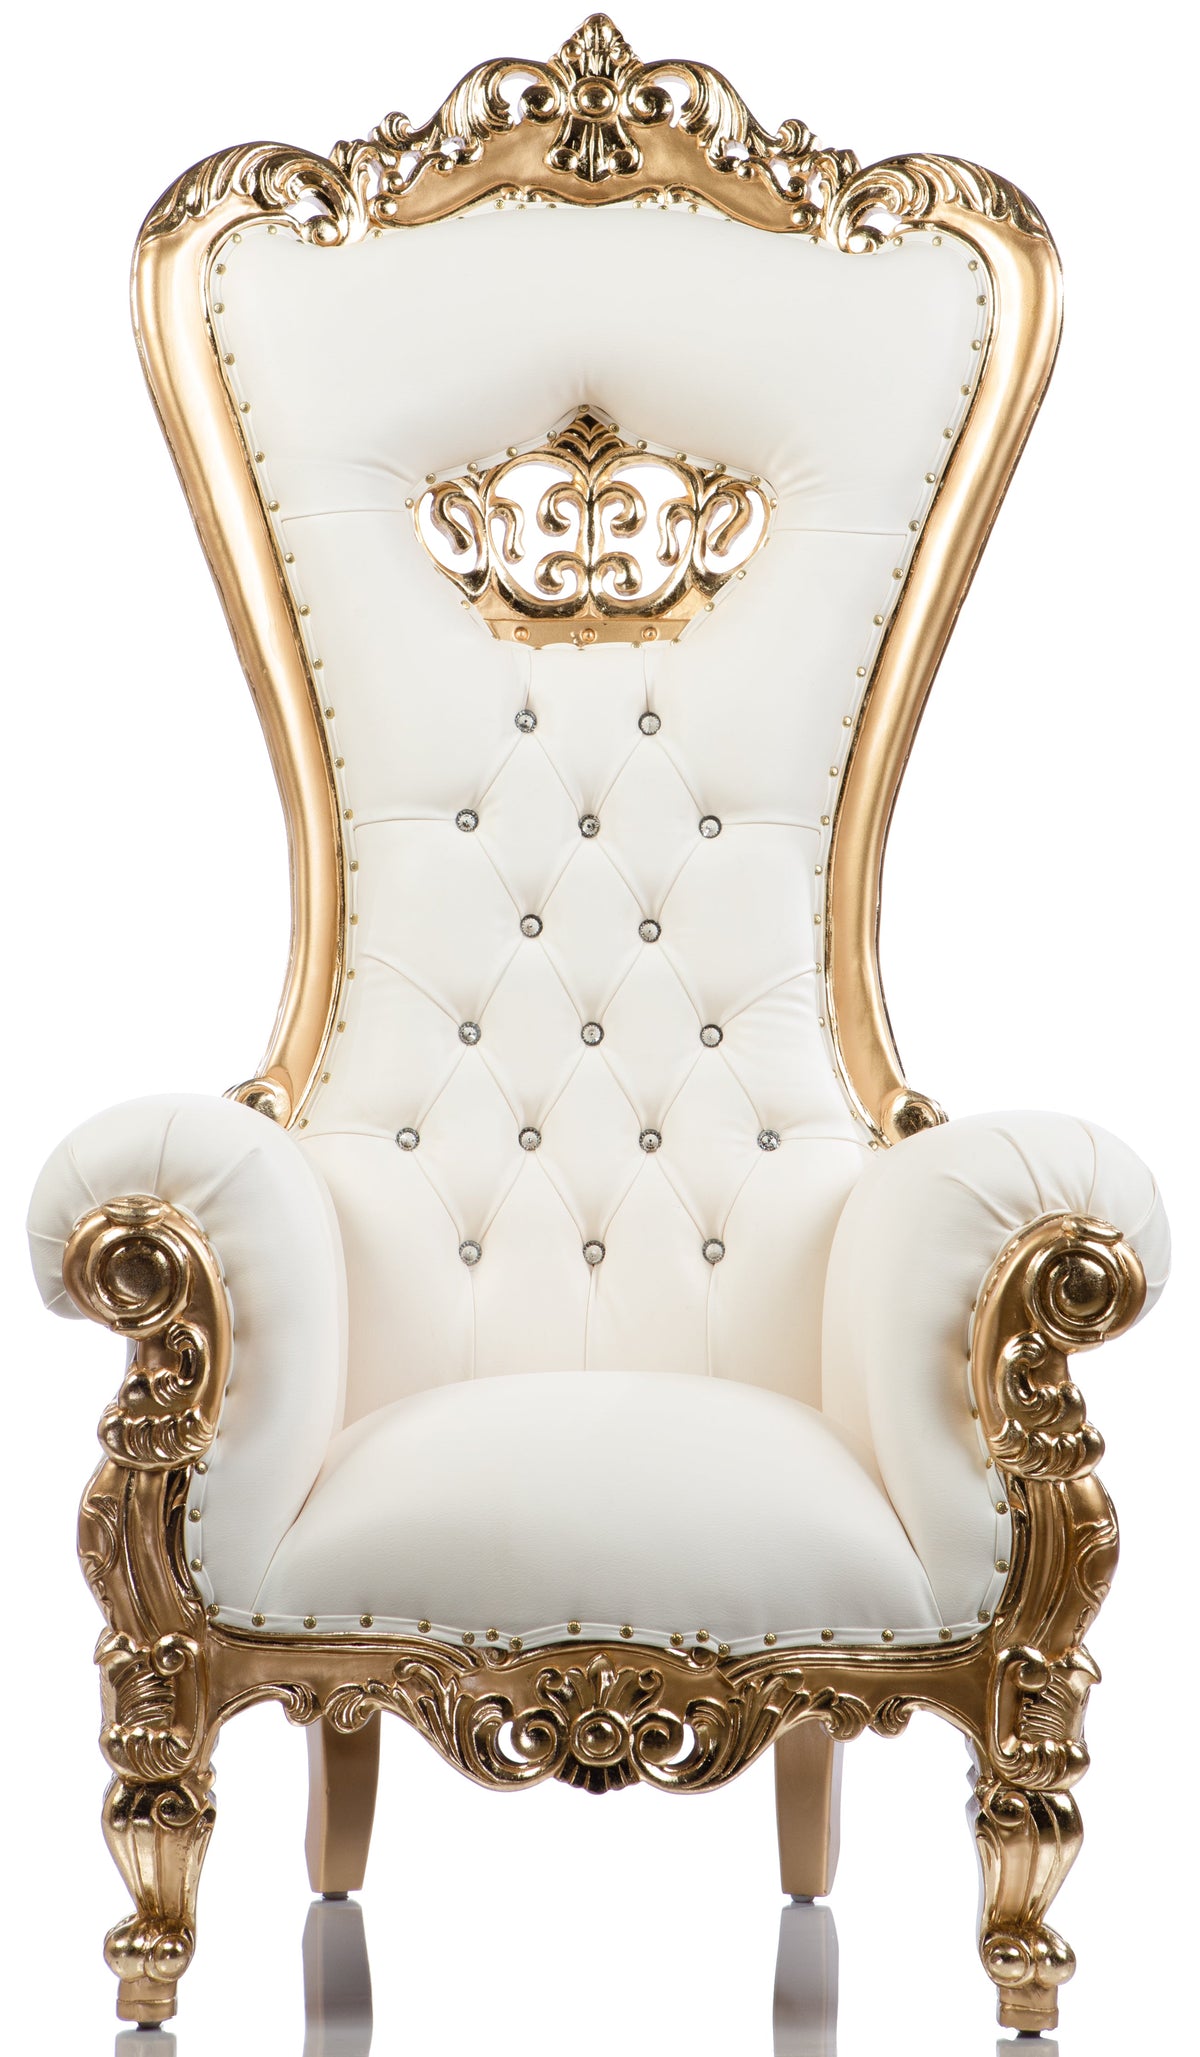 Vintage "Crowned Lenox" Shellback throne (White/Gold)